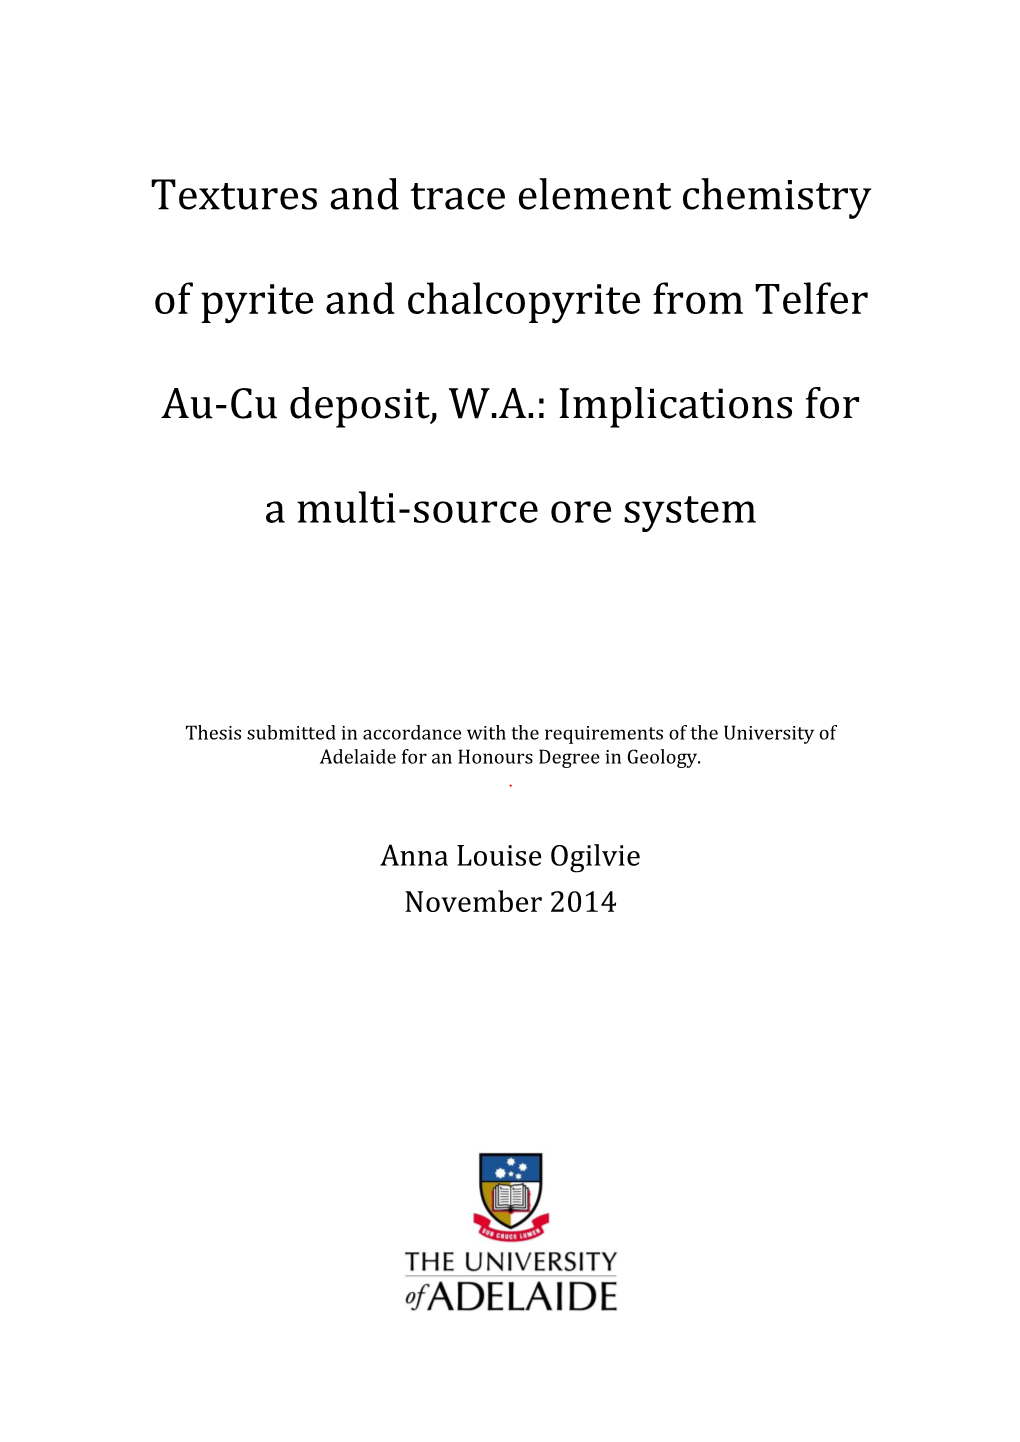 Textural and La-Icp-Ms Trace Element Chemistry Analysis of Pyrite and Chalcopyrite from Telfer Au-Cu Deposit, W.A